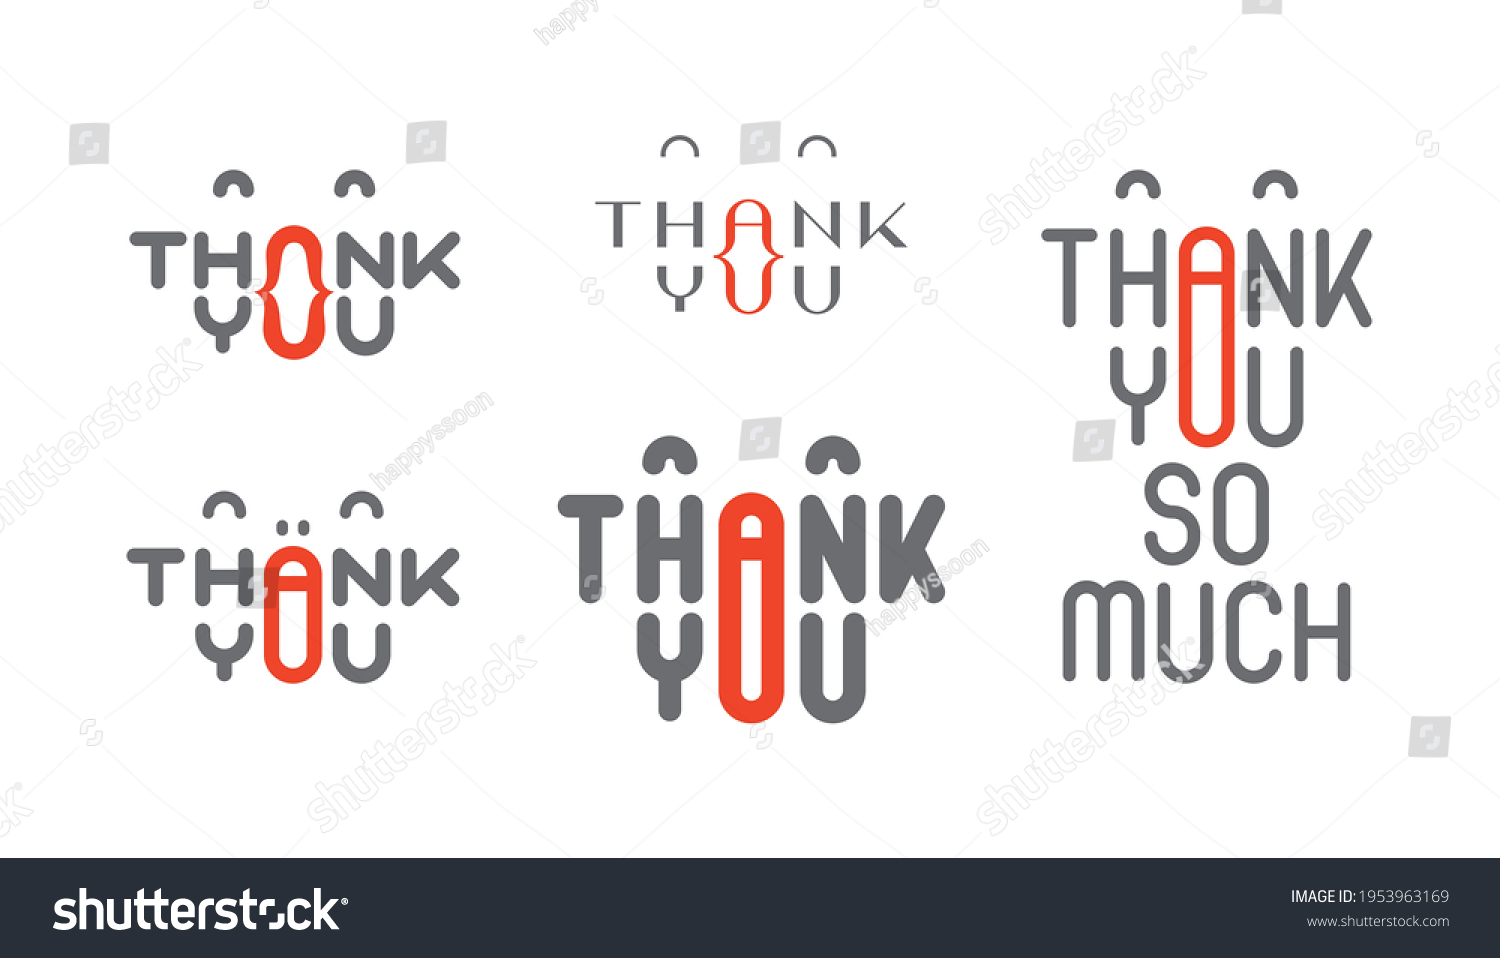 Cute Thank You Lettering Cards Advertisements Stock Vector Royalty Free 1953963169 Shutterstock 1988